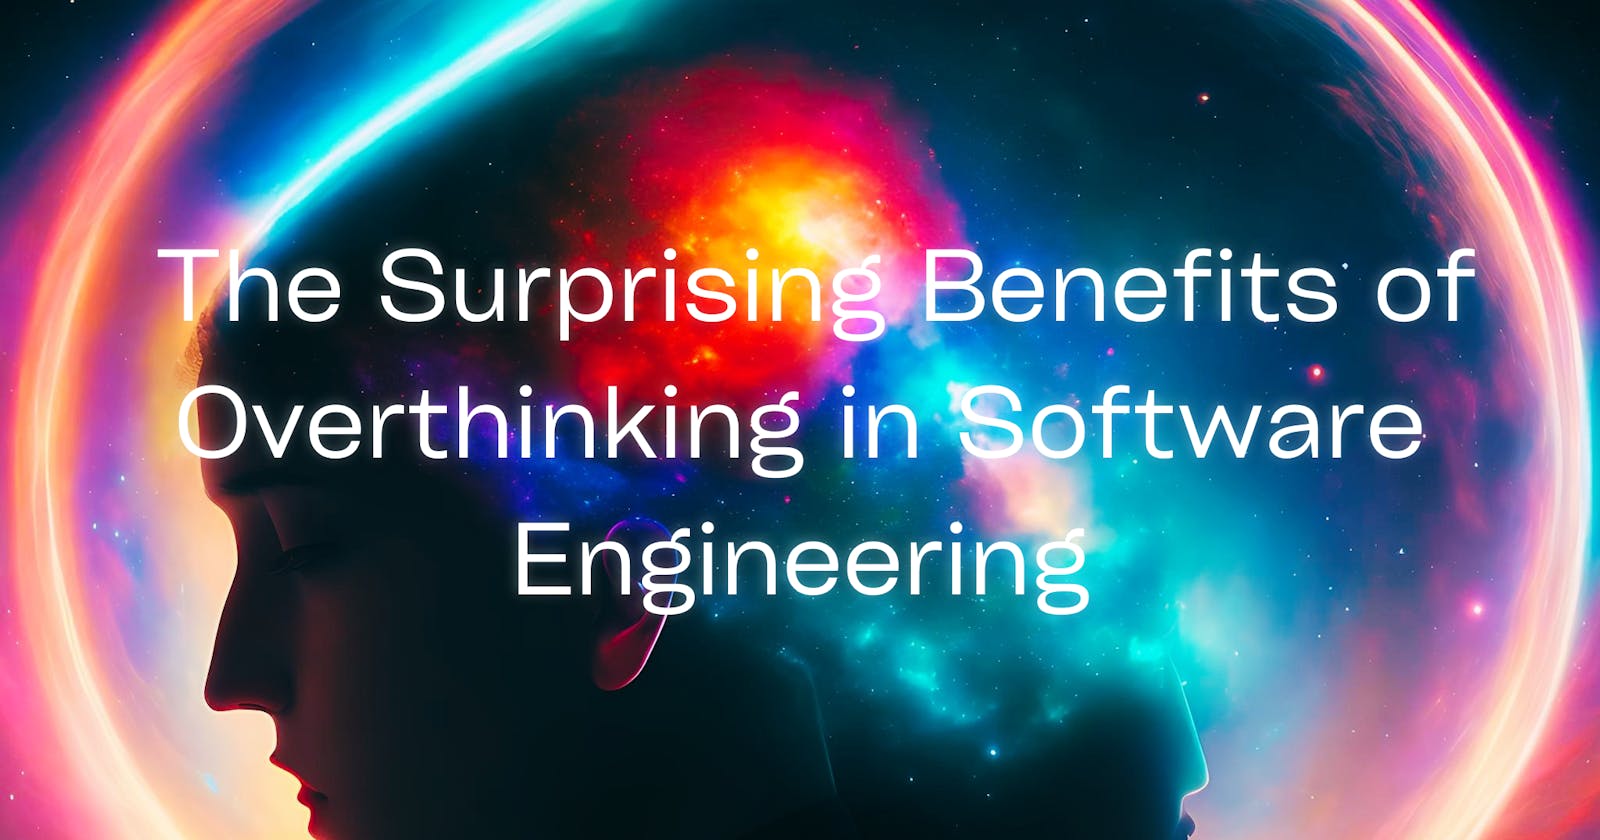 The Surprising Benefits of Overthinking in Software Engineering